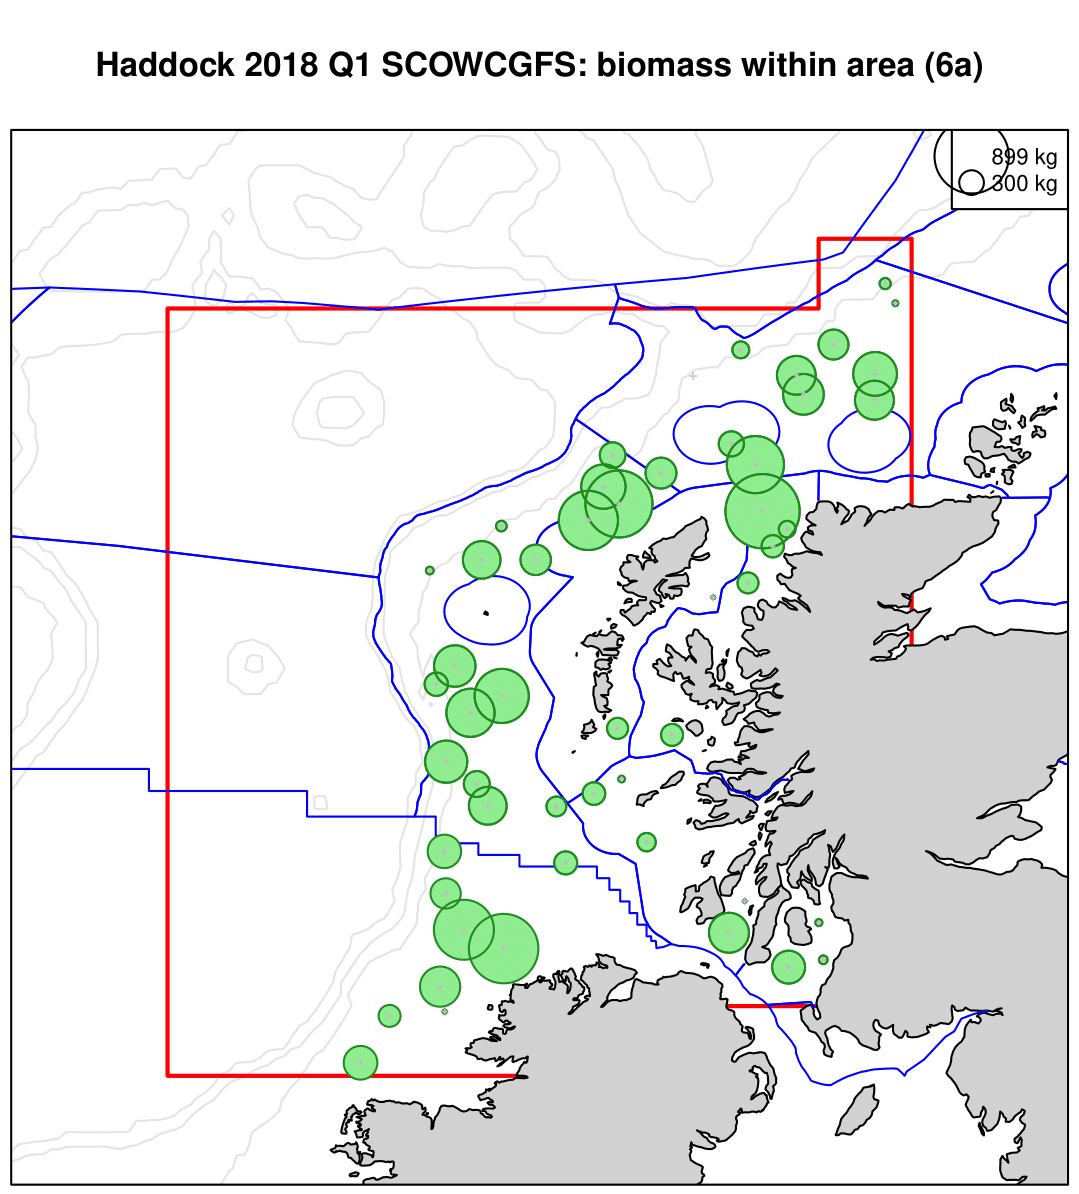 Haddock 2018 Q1 SCOWCGFS: biomass within area (6a)